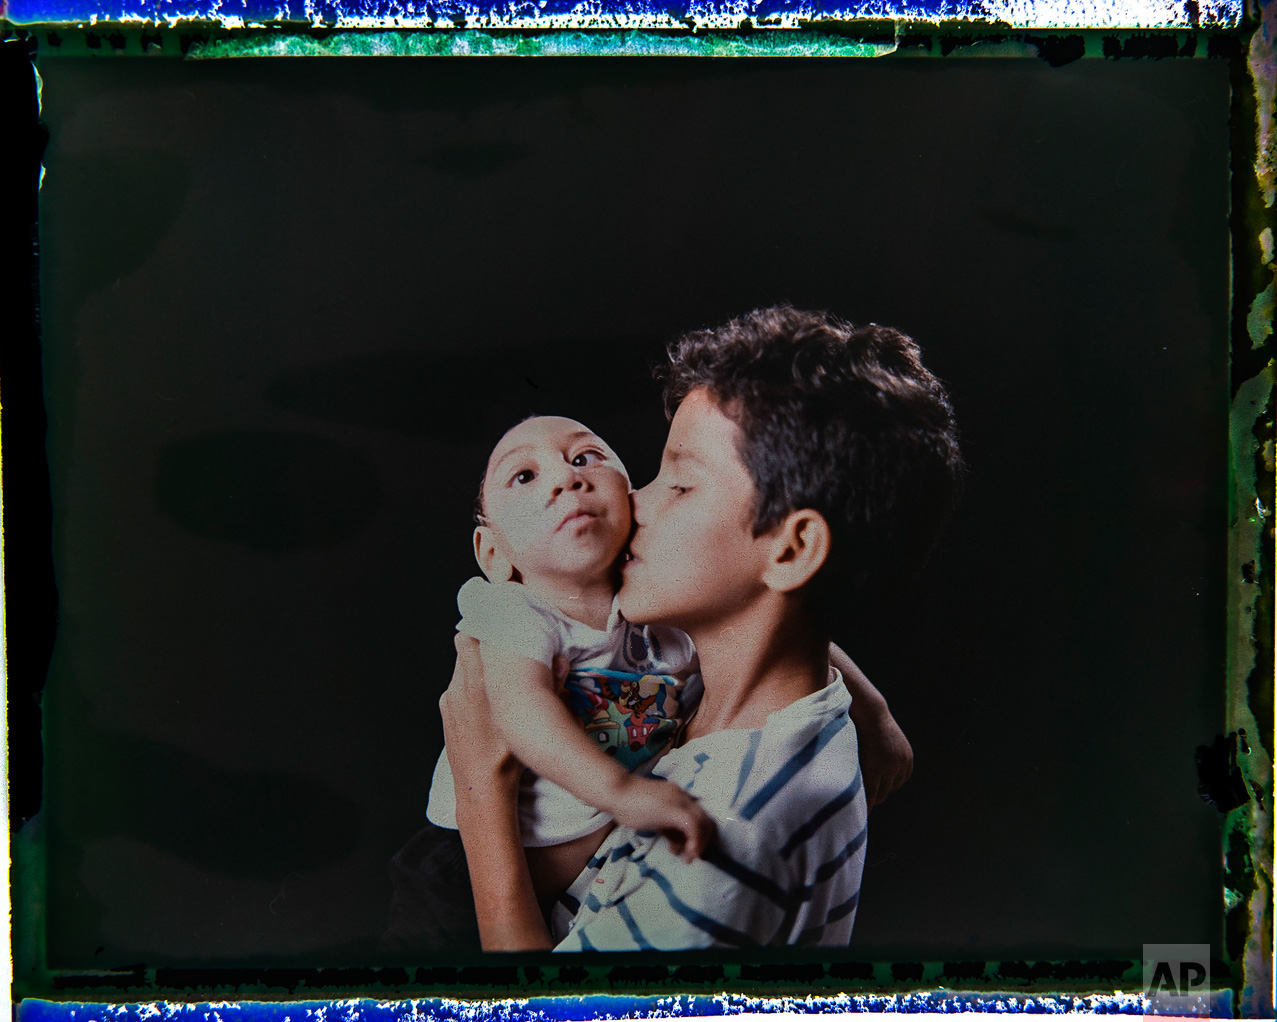  In this Sept. 27, 2016 photo made from a negative recovered from instant film, Elisson Campos poses with his one-year-old brother, Jose Wesley Campos, who was born with microcephaly, one of many serious medical problems that can be caused by congeni